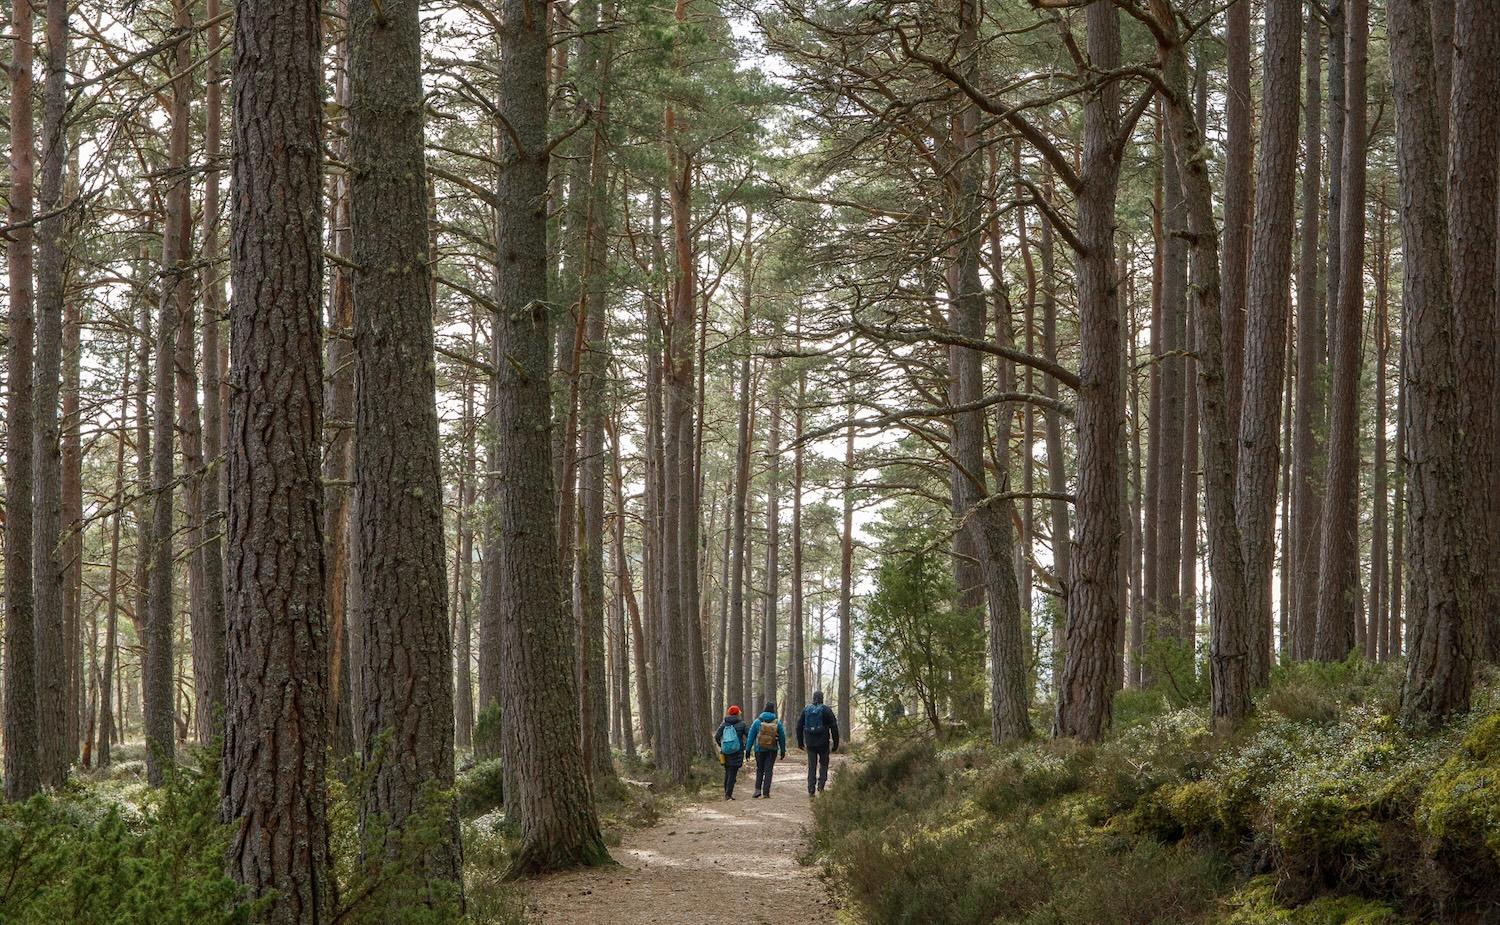 Wilderness Scotland guests walk through the forest at Abernethy National Nature Reserve.